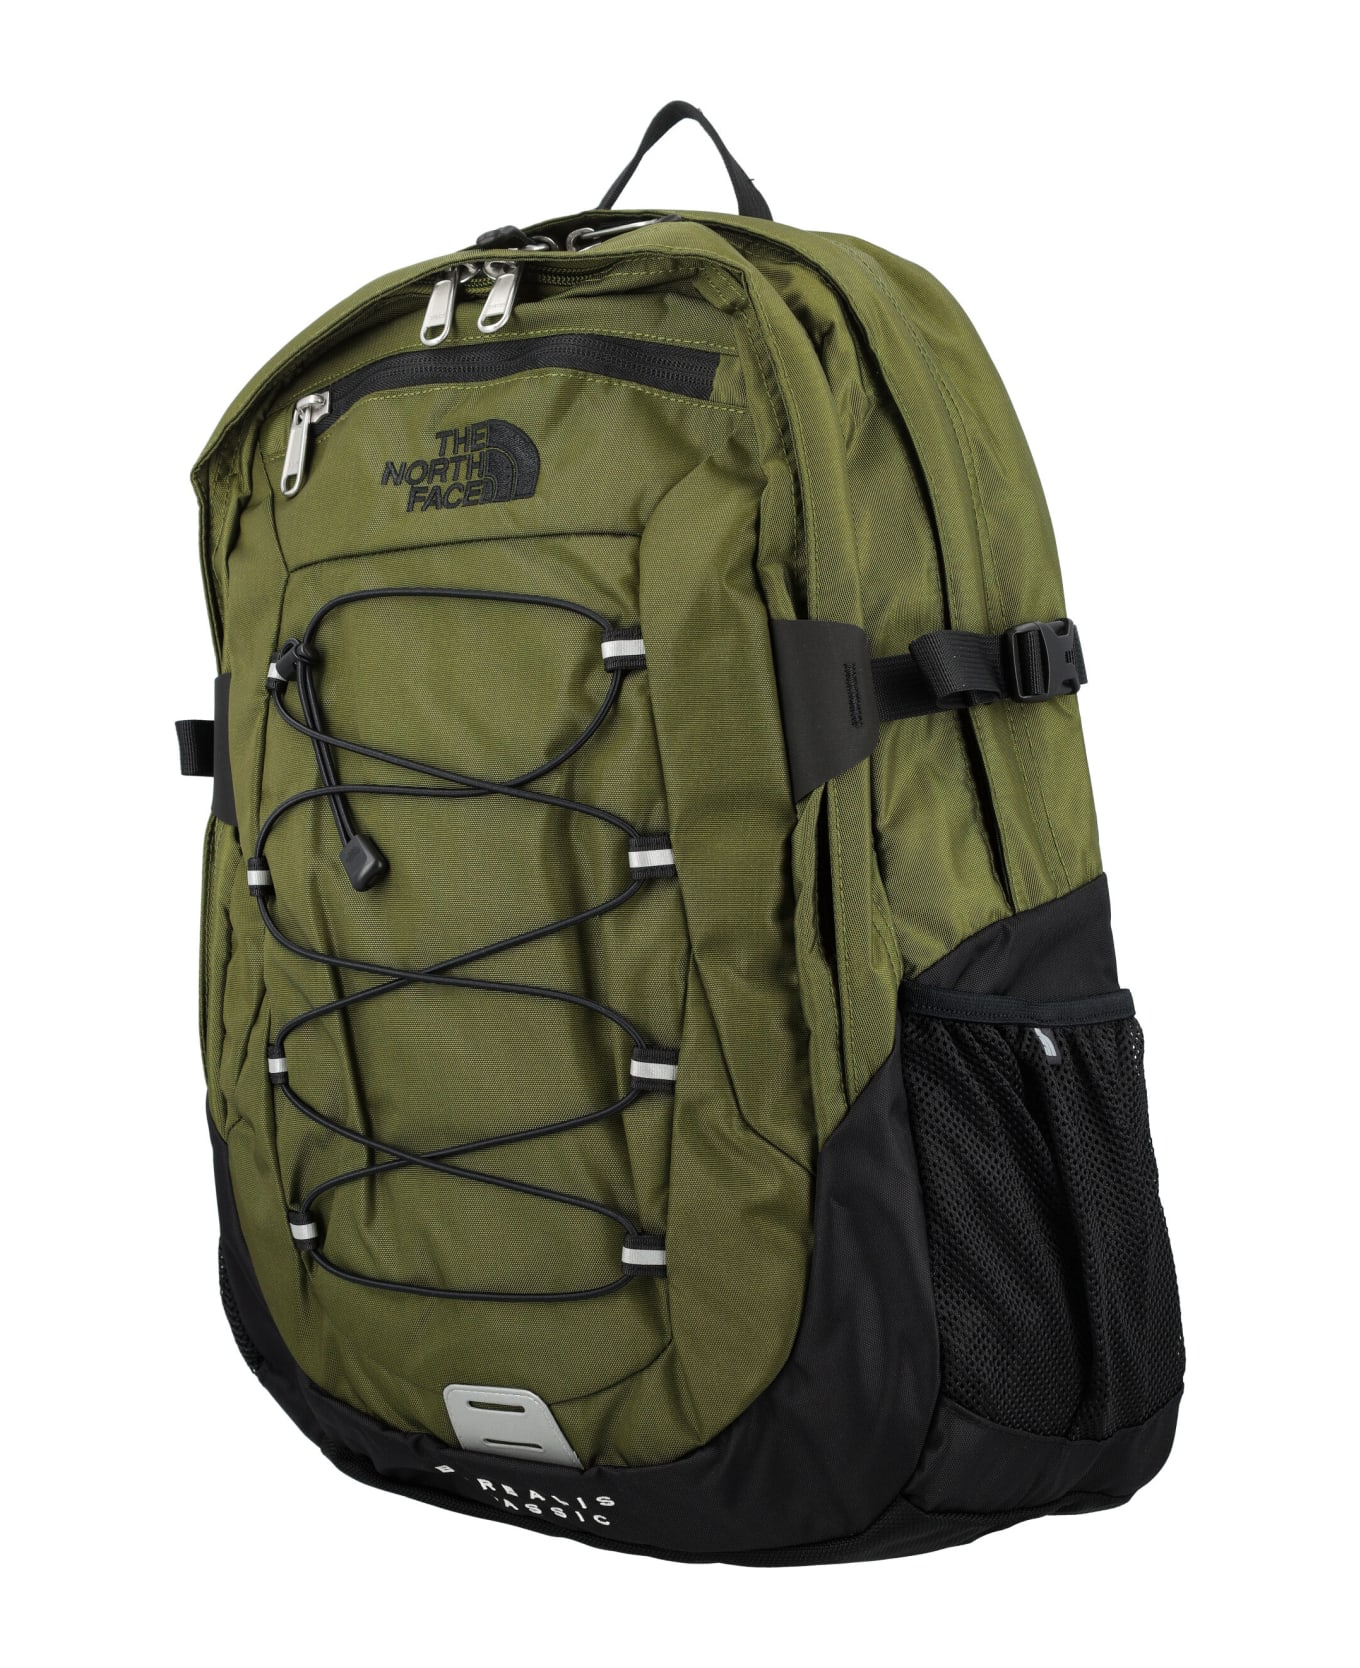 The North Face Borealis Classic Backpack - OLIVE